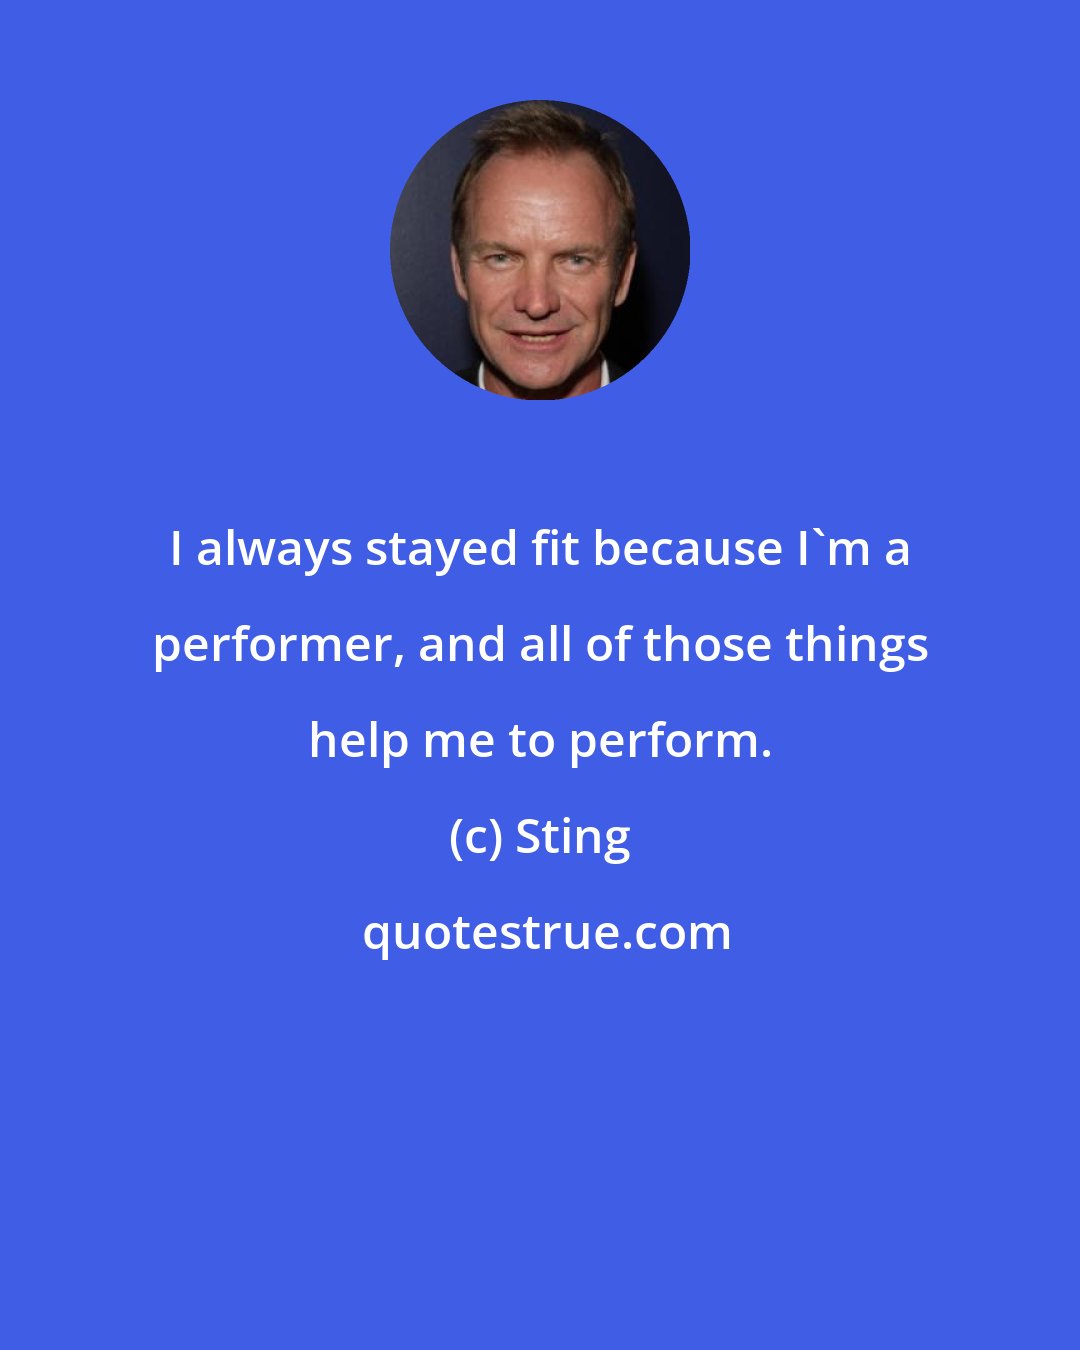 Sting: I always stayed fit because I'm a performer, and all of those things help me to perform.